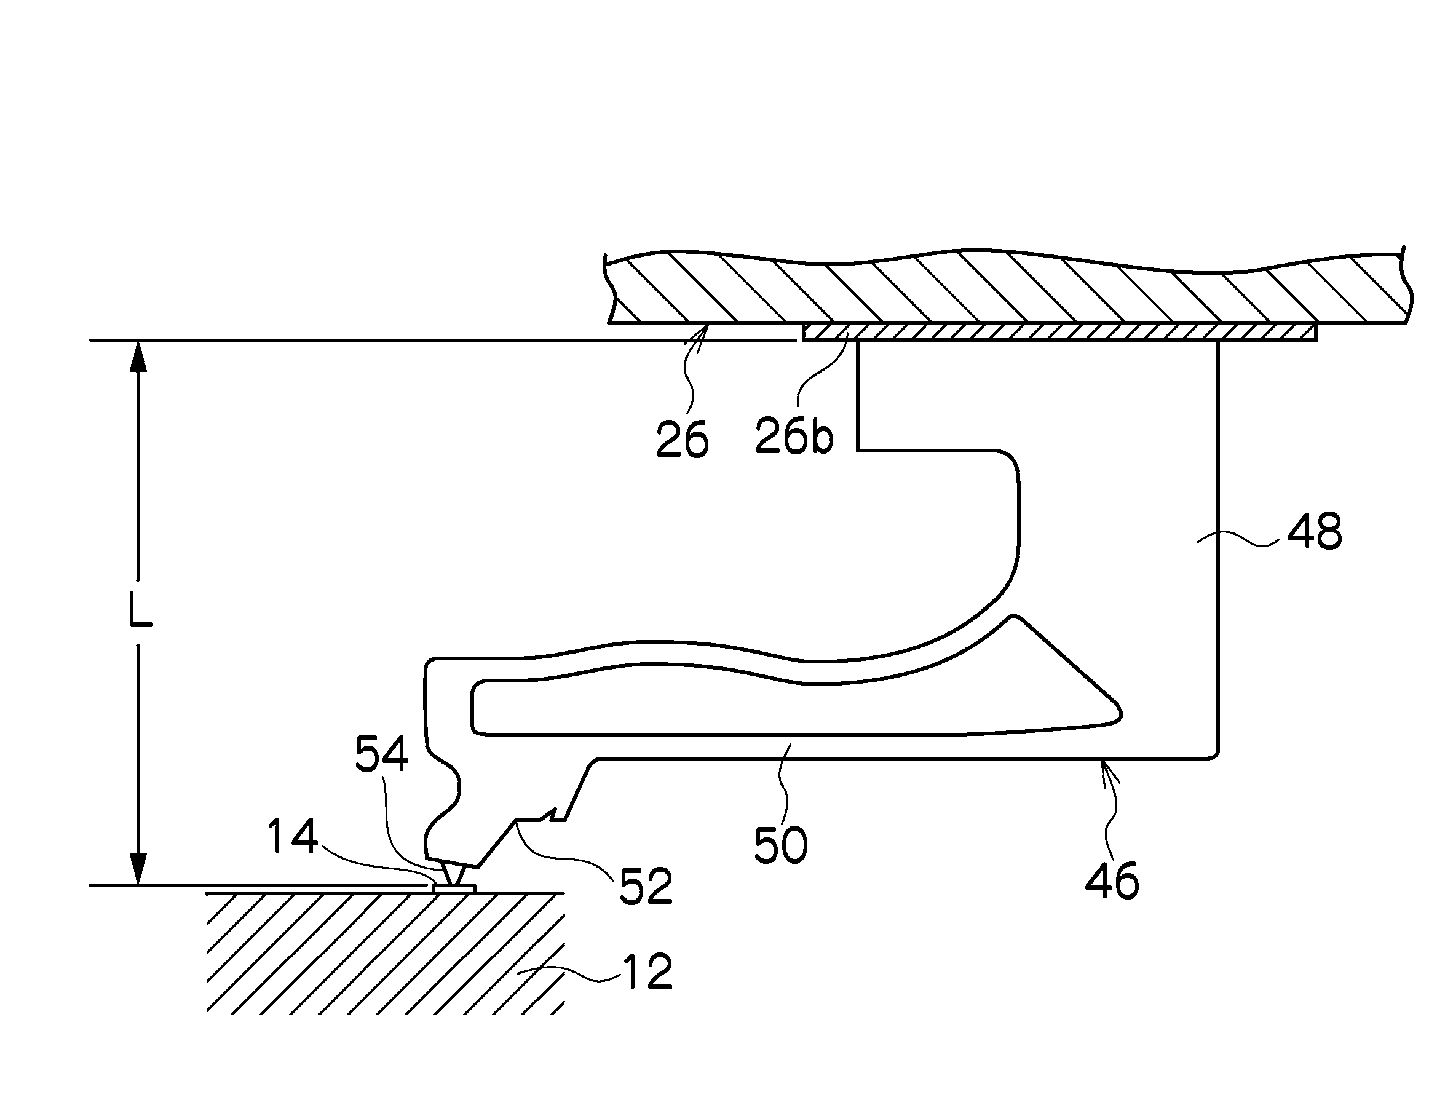 Electrical connecting apparatus